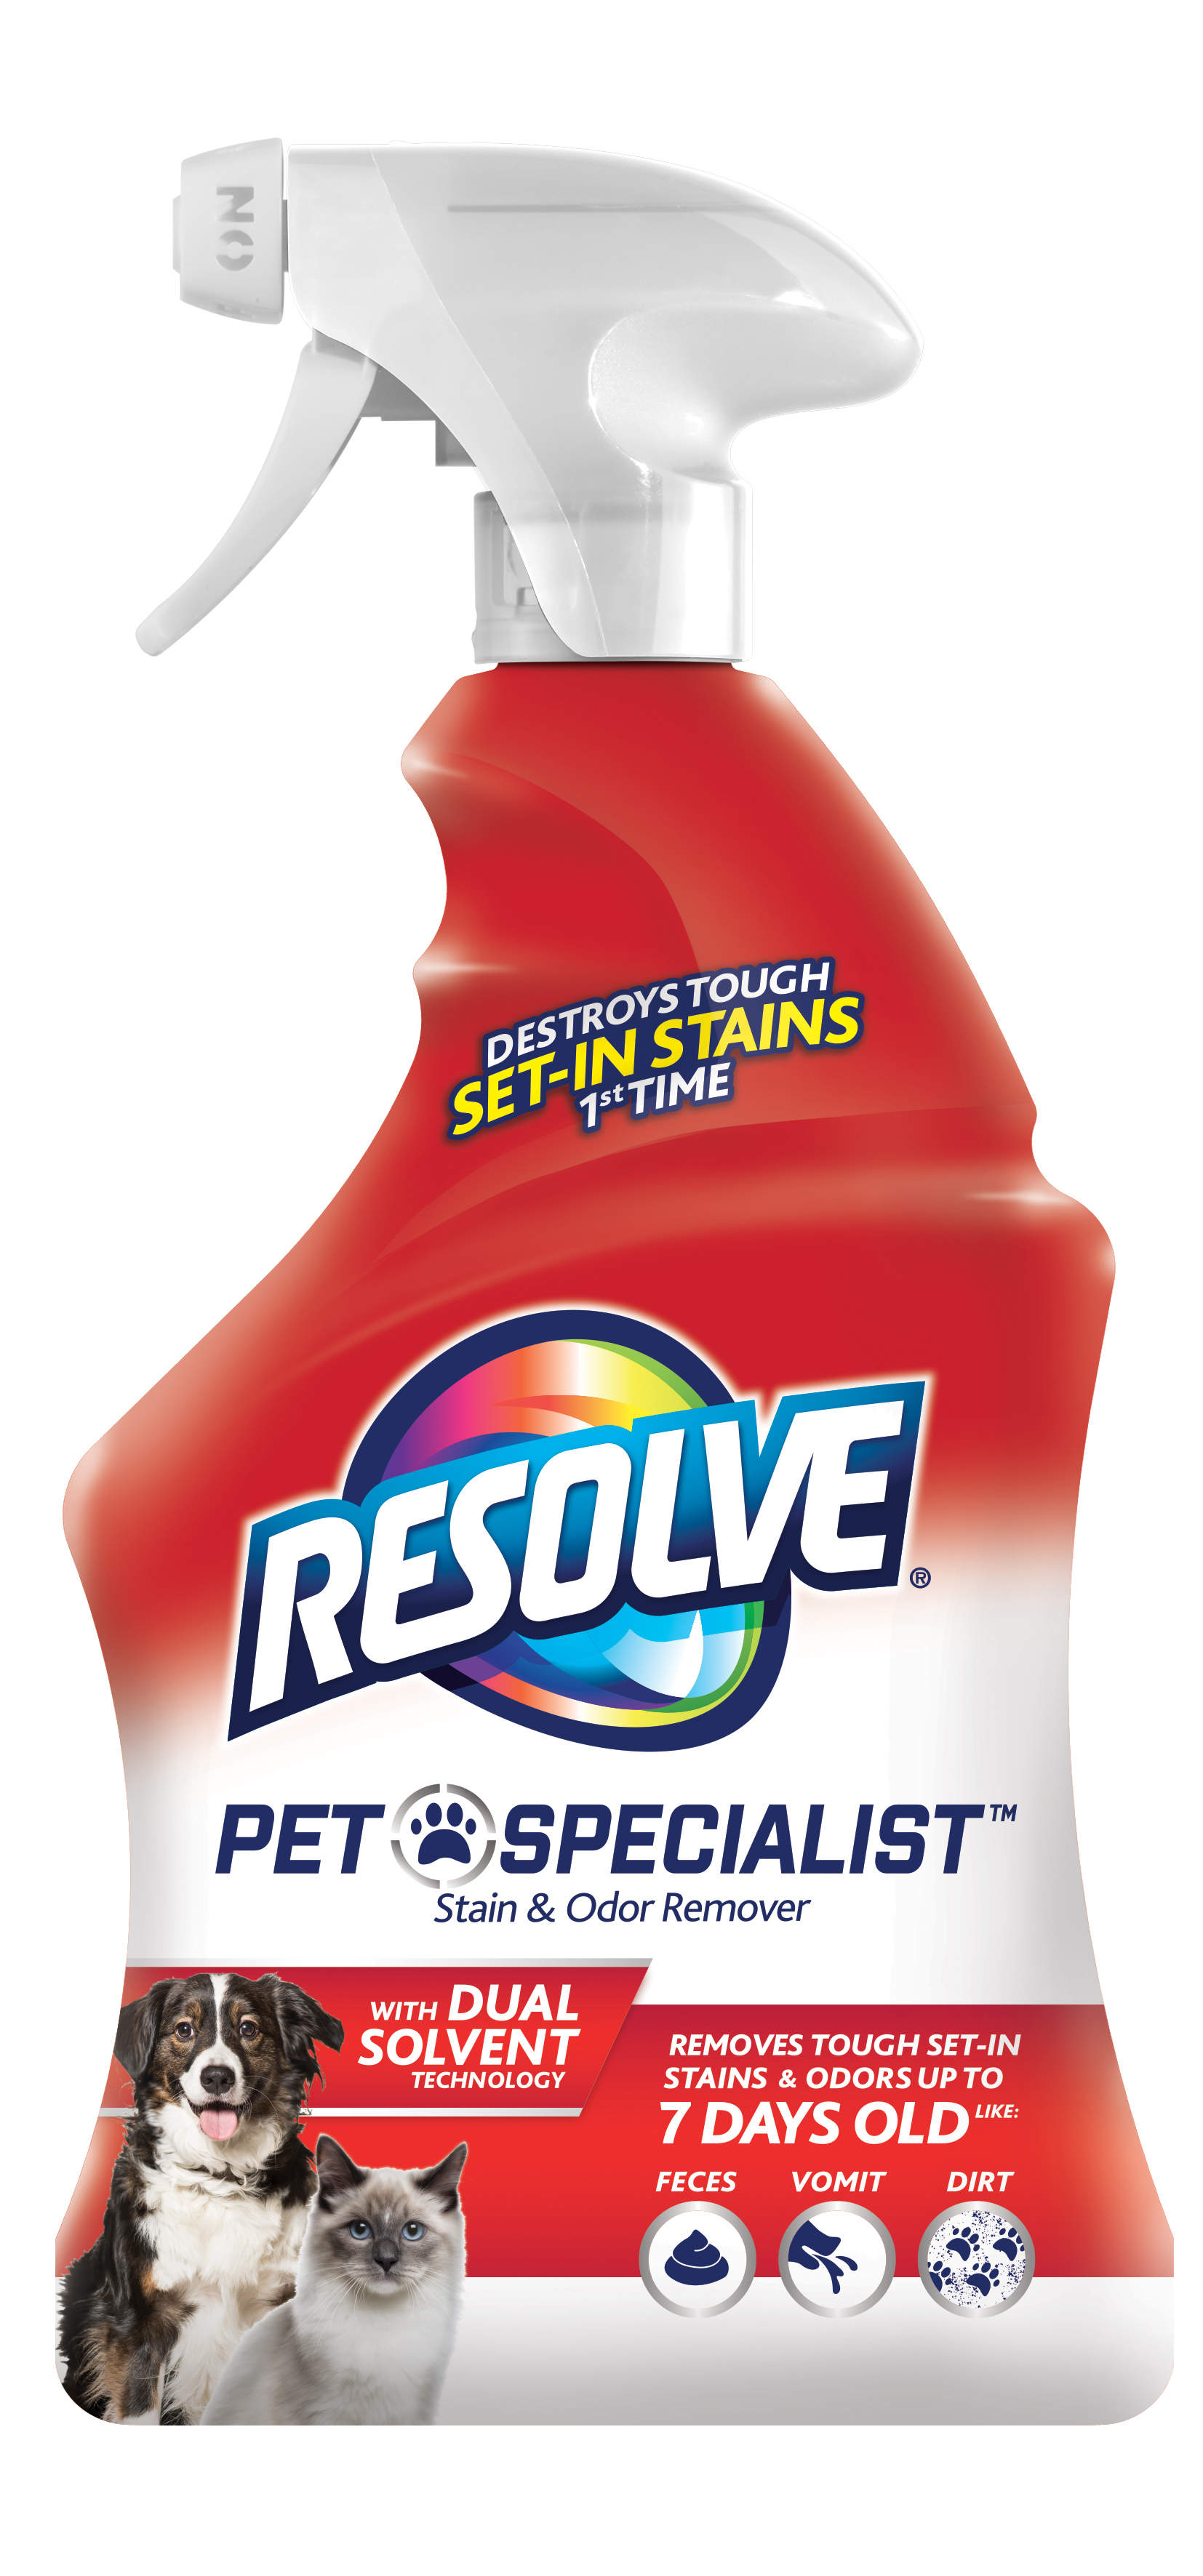 RESOLVE Pet Specialist Stain  Odor Remover Trigger